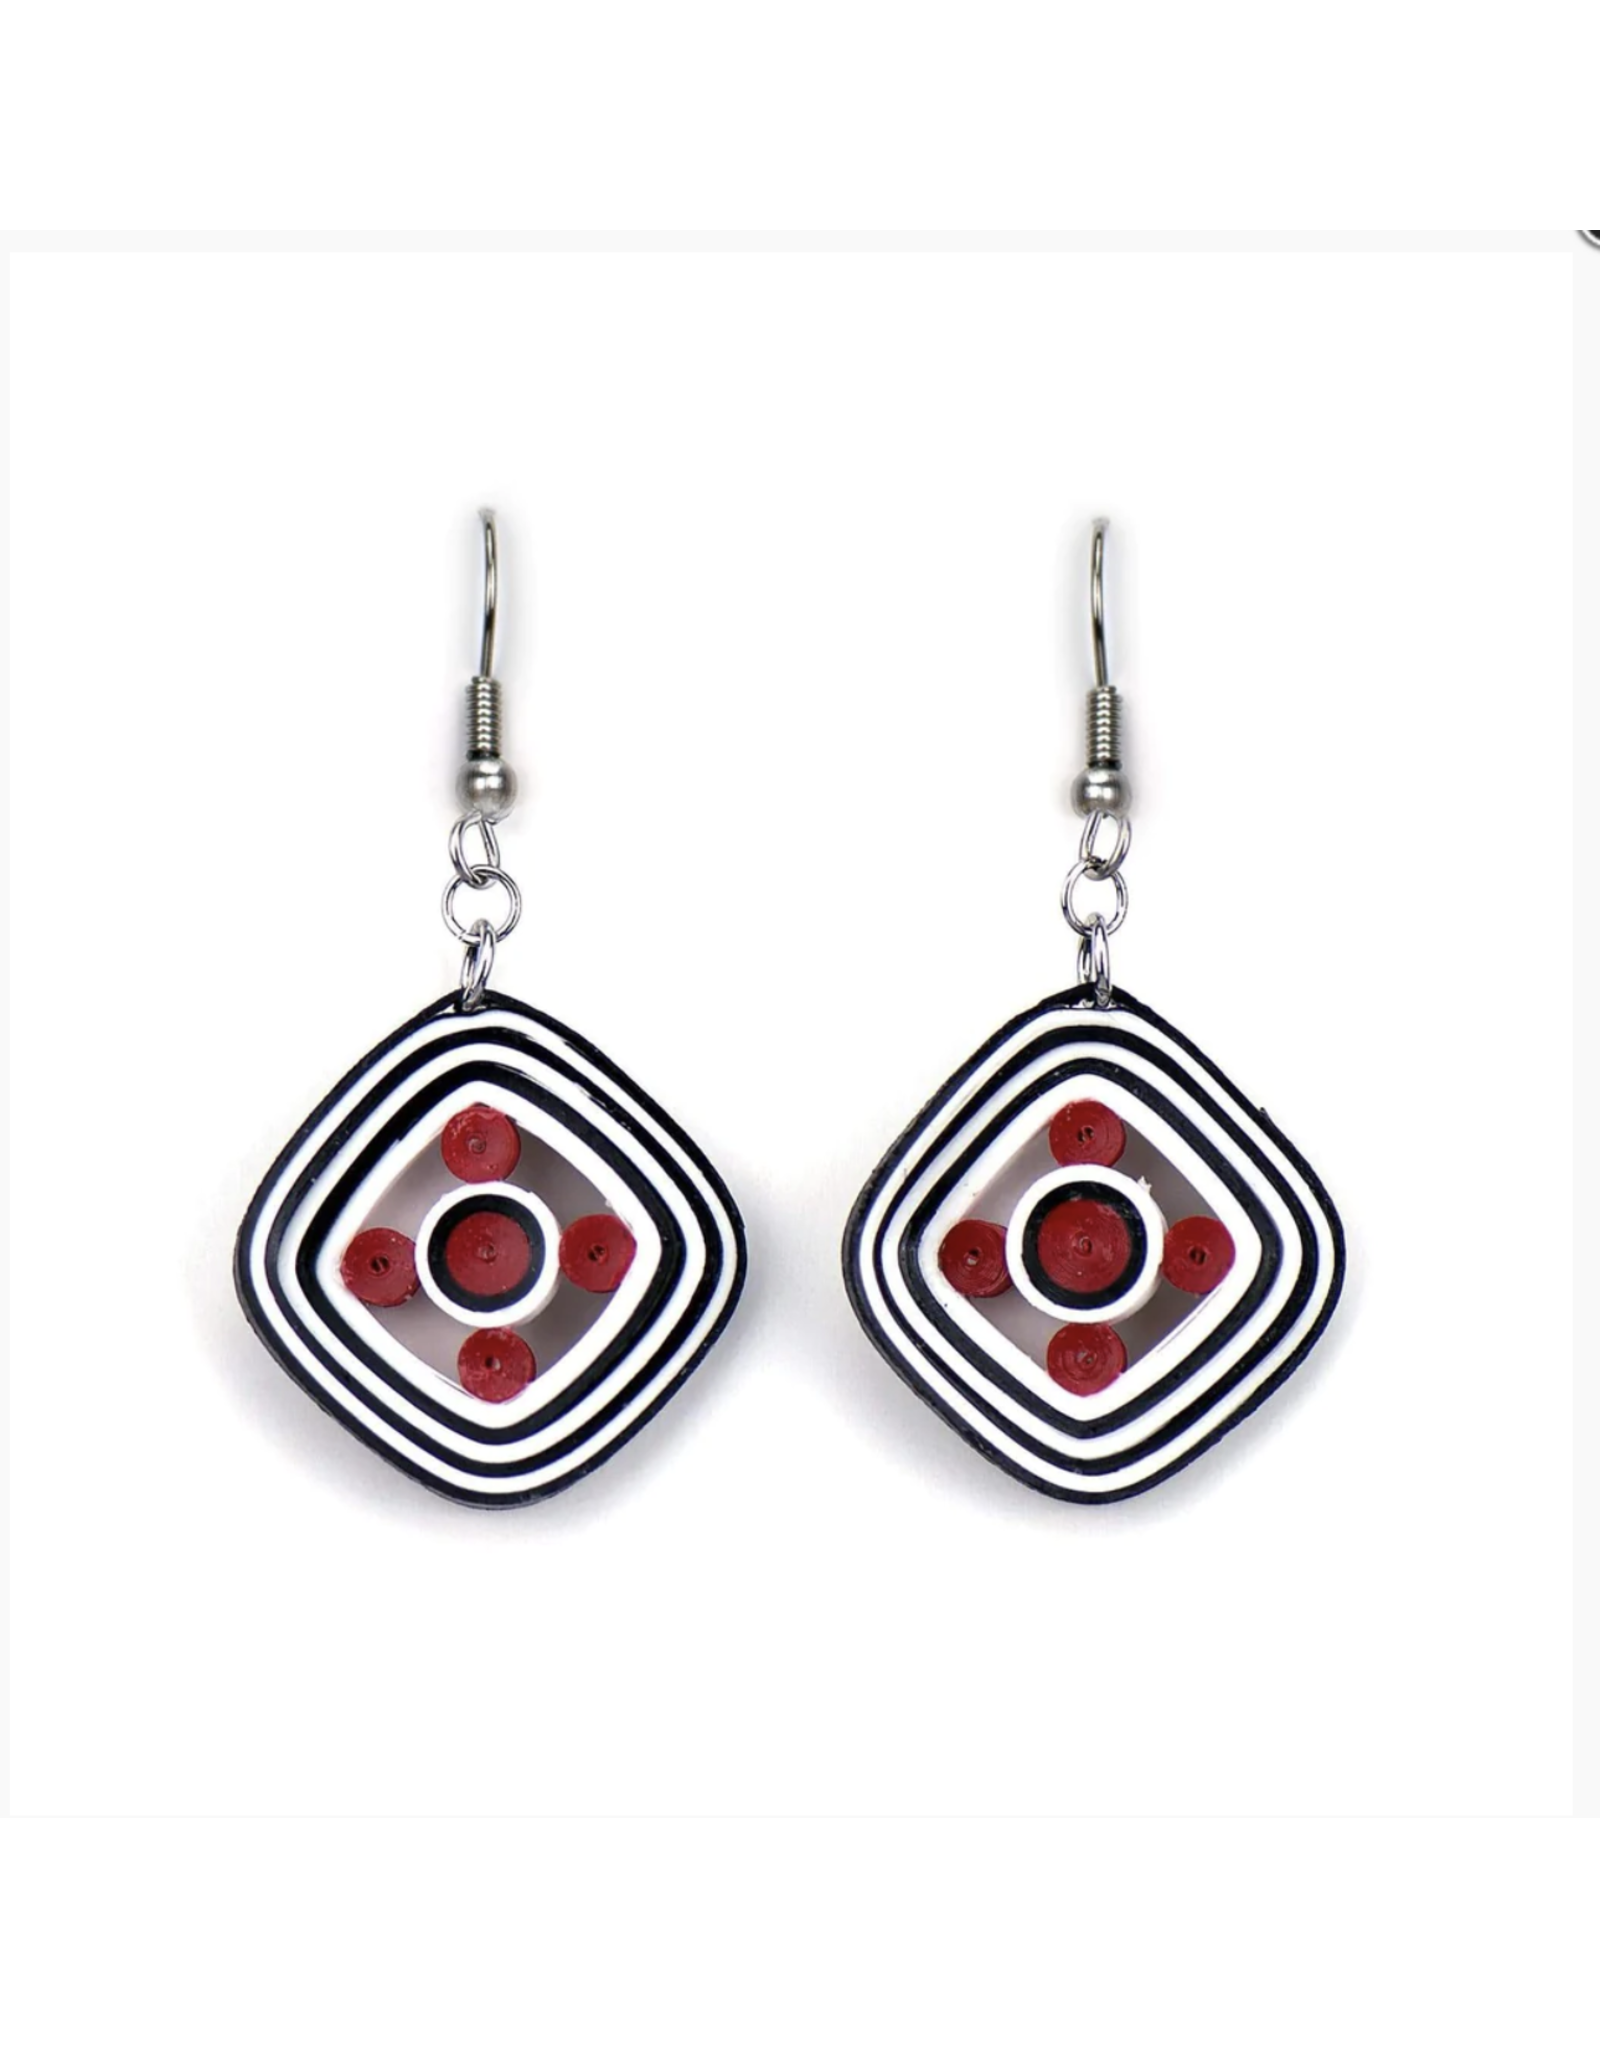 Trade roots Quilled Poker Chip Earrings, Vietnam